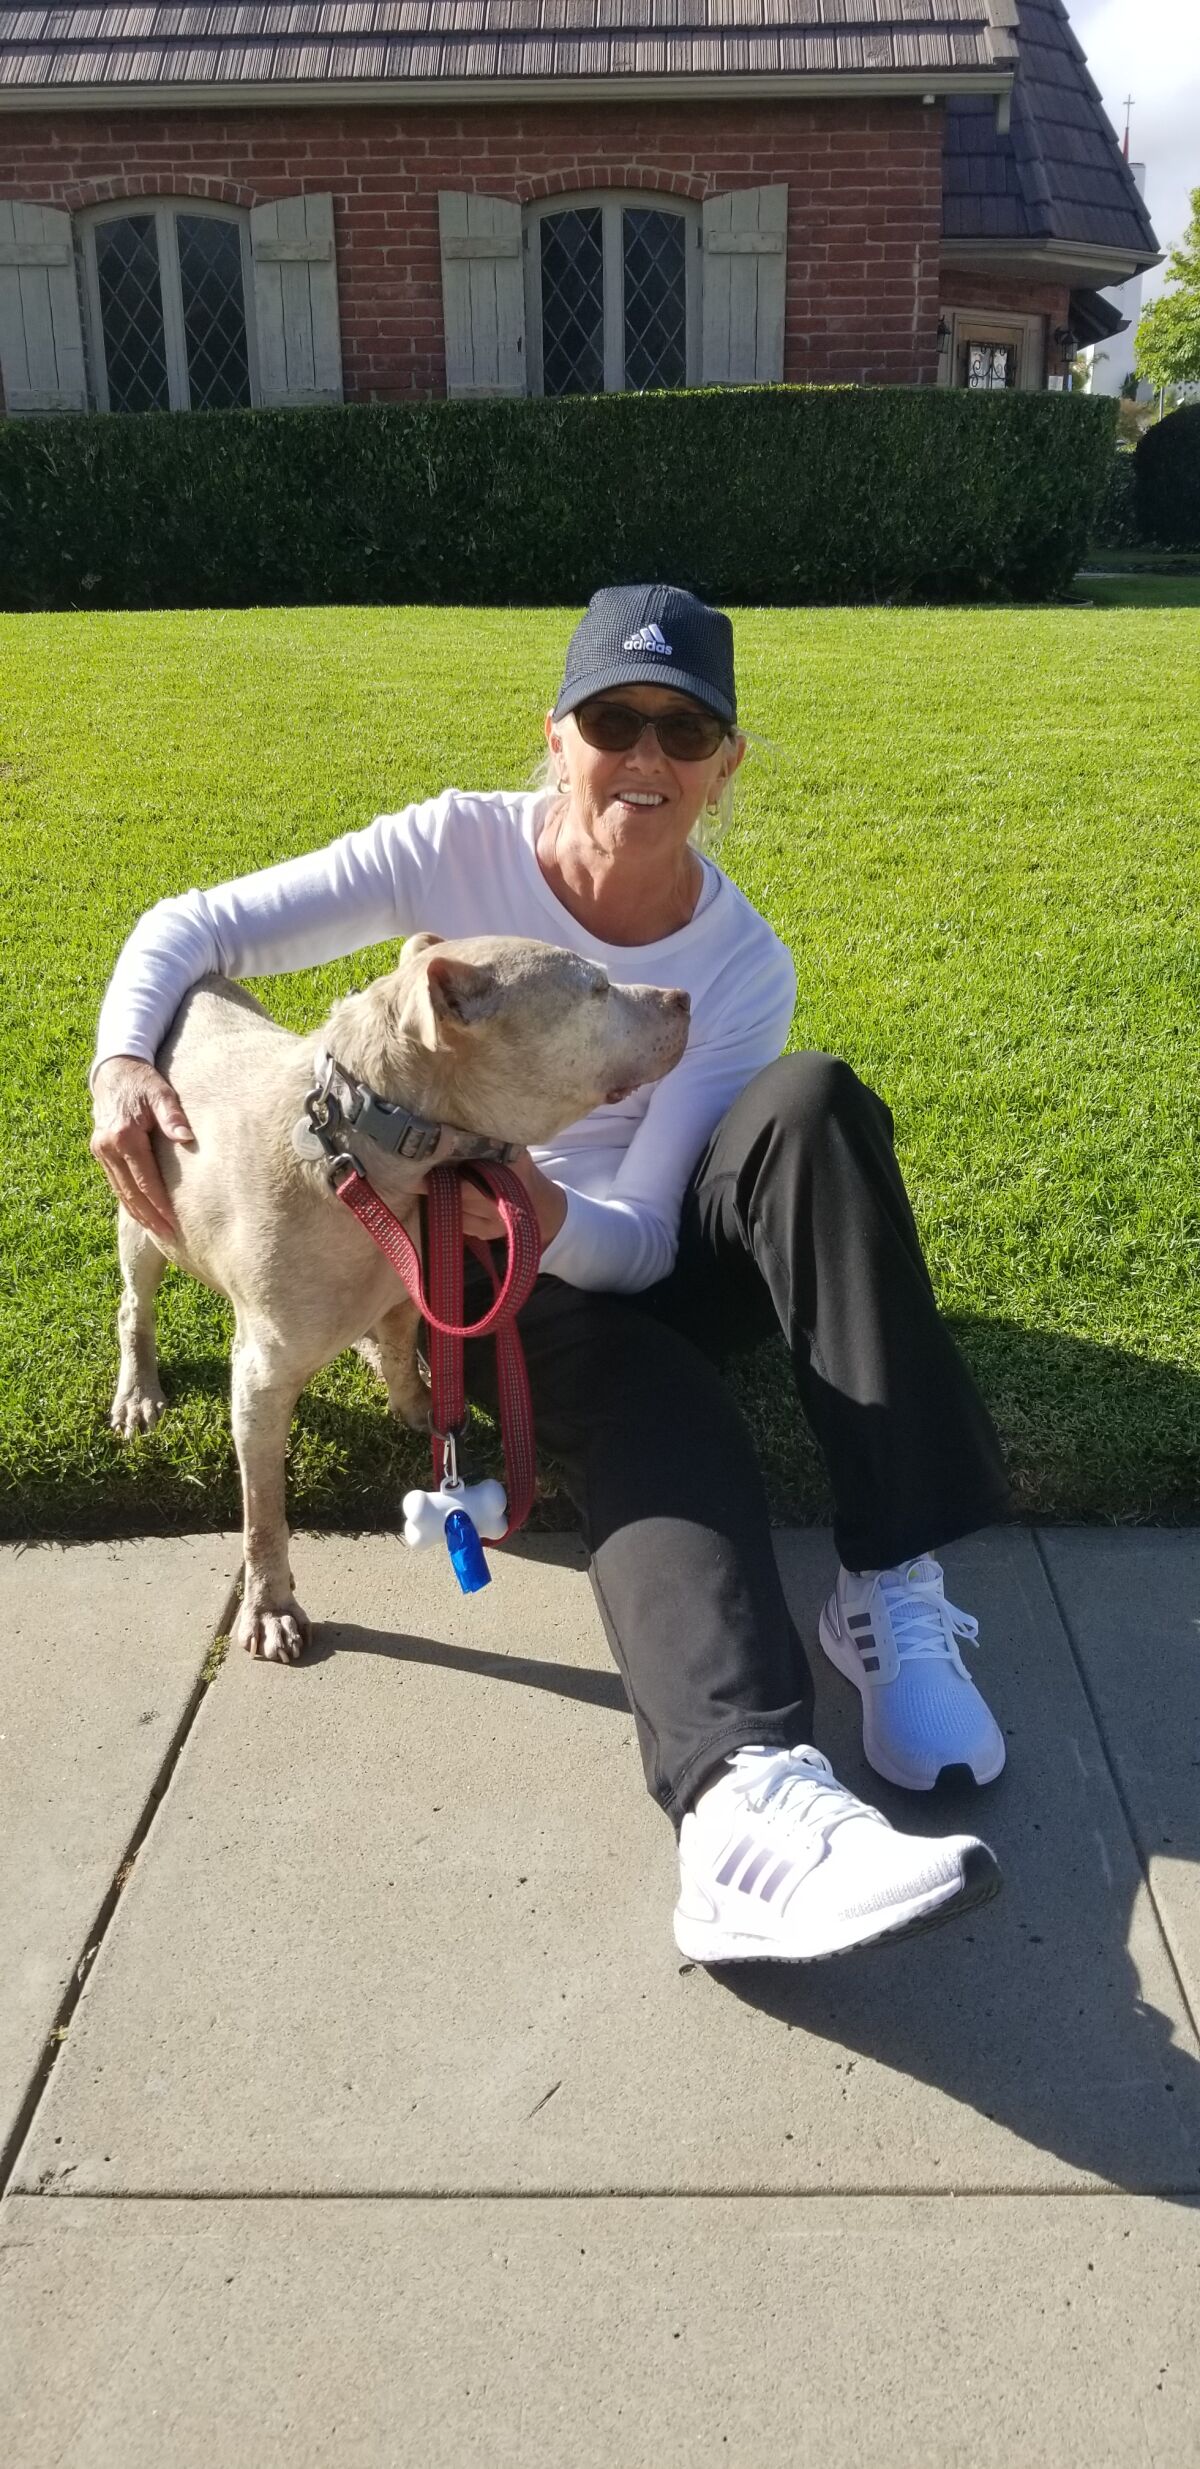 Patricia Robles and her dog Minnie pause during a walk along Diamond Street.